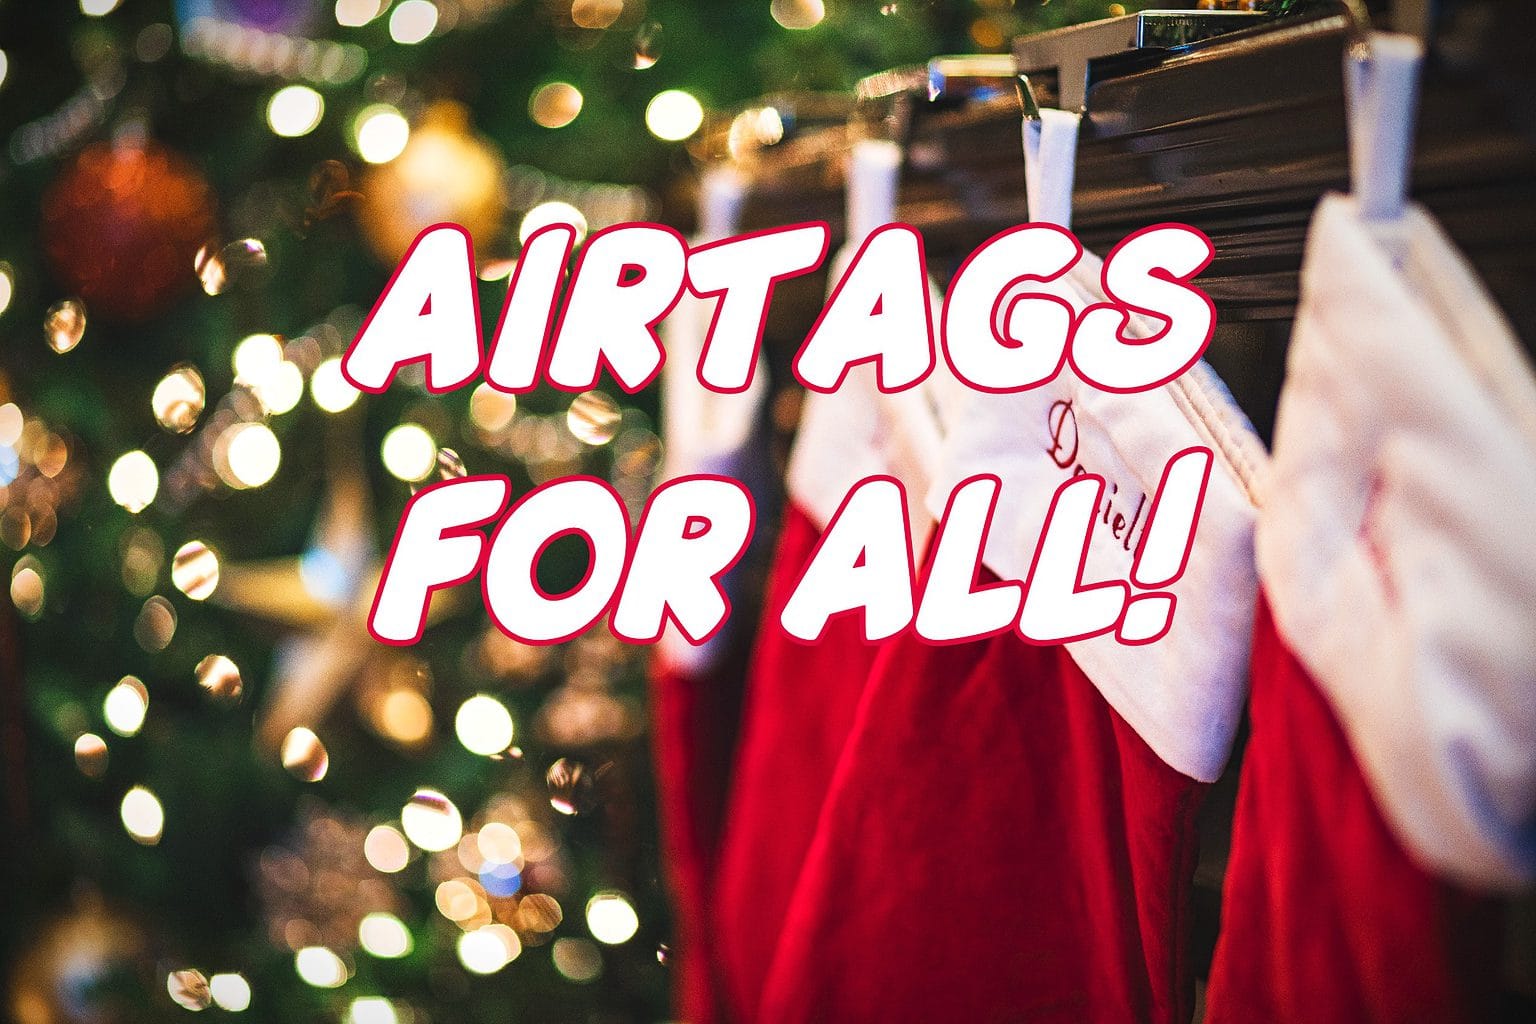 AirTag ultimate Apple stocking stuffer: Looking for a last-minute gift for the Apple fan in your life? You can't go wrong with AirTags.